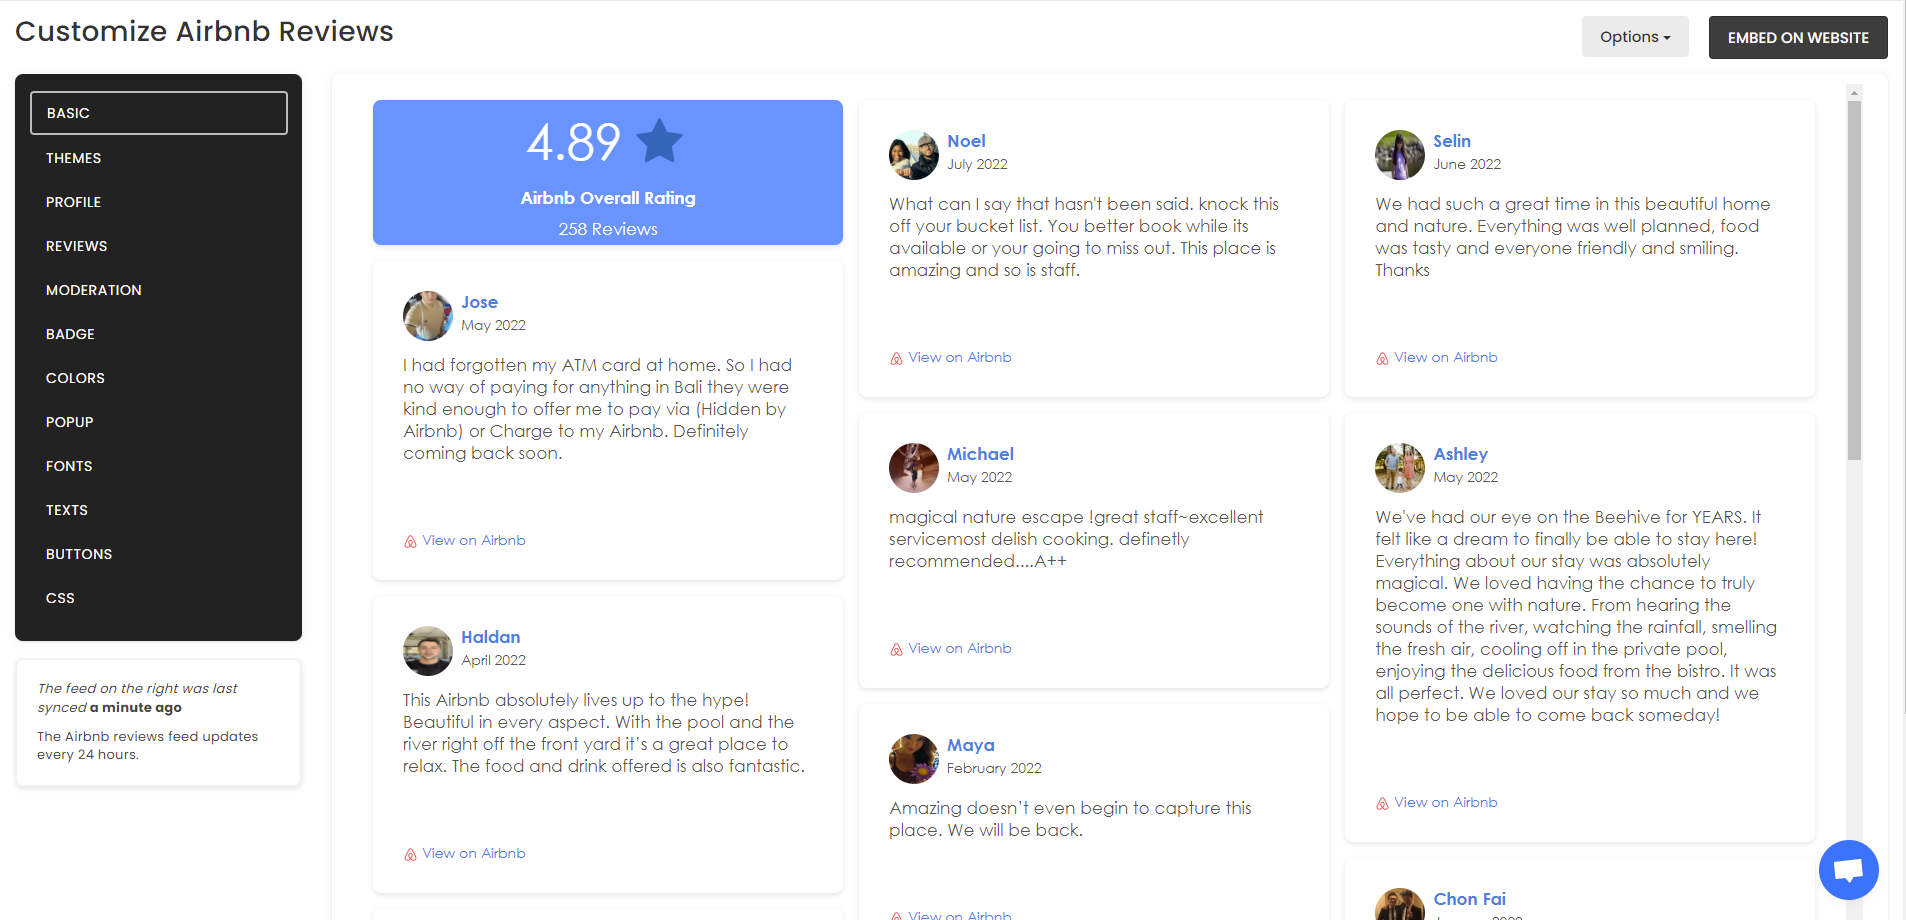 Customize your feed - Free Airbnb Reviews Widget For Weebly Website